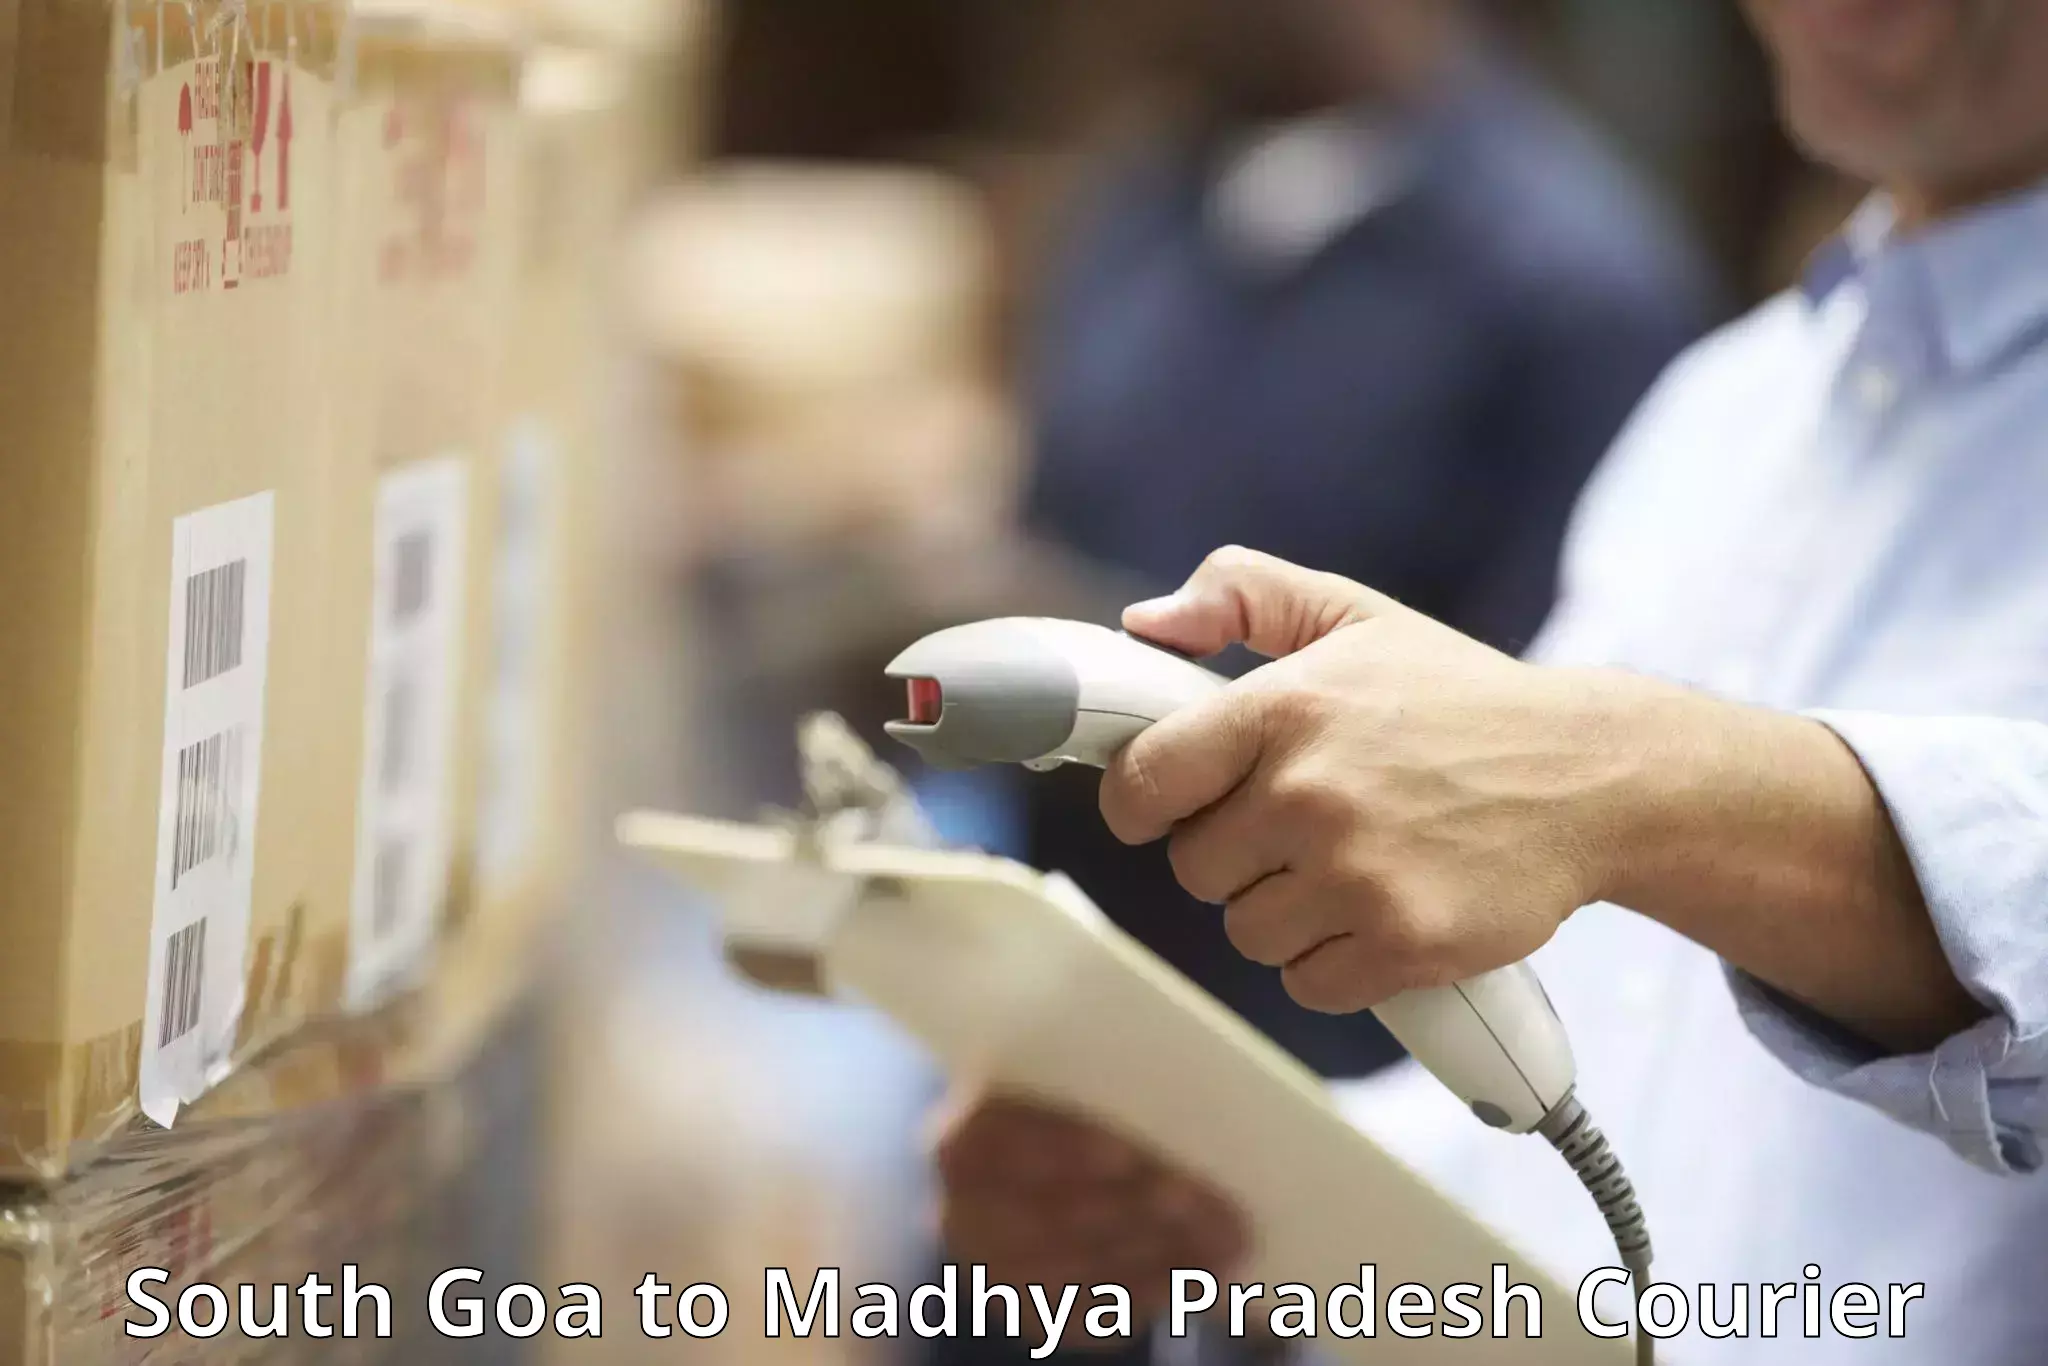 Personal effects shipping in South Goa to Madhya Pradesh